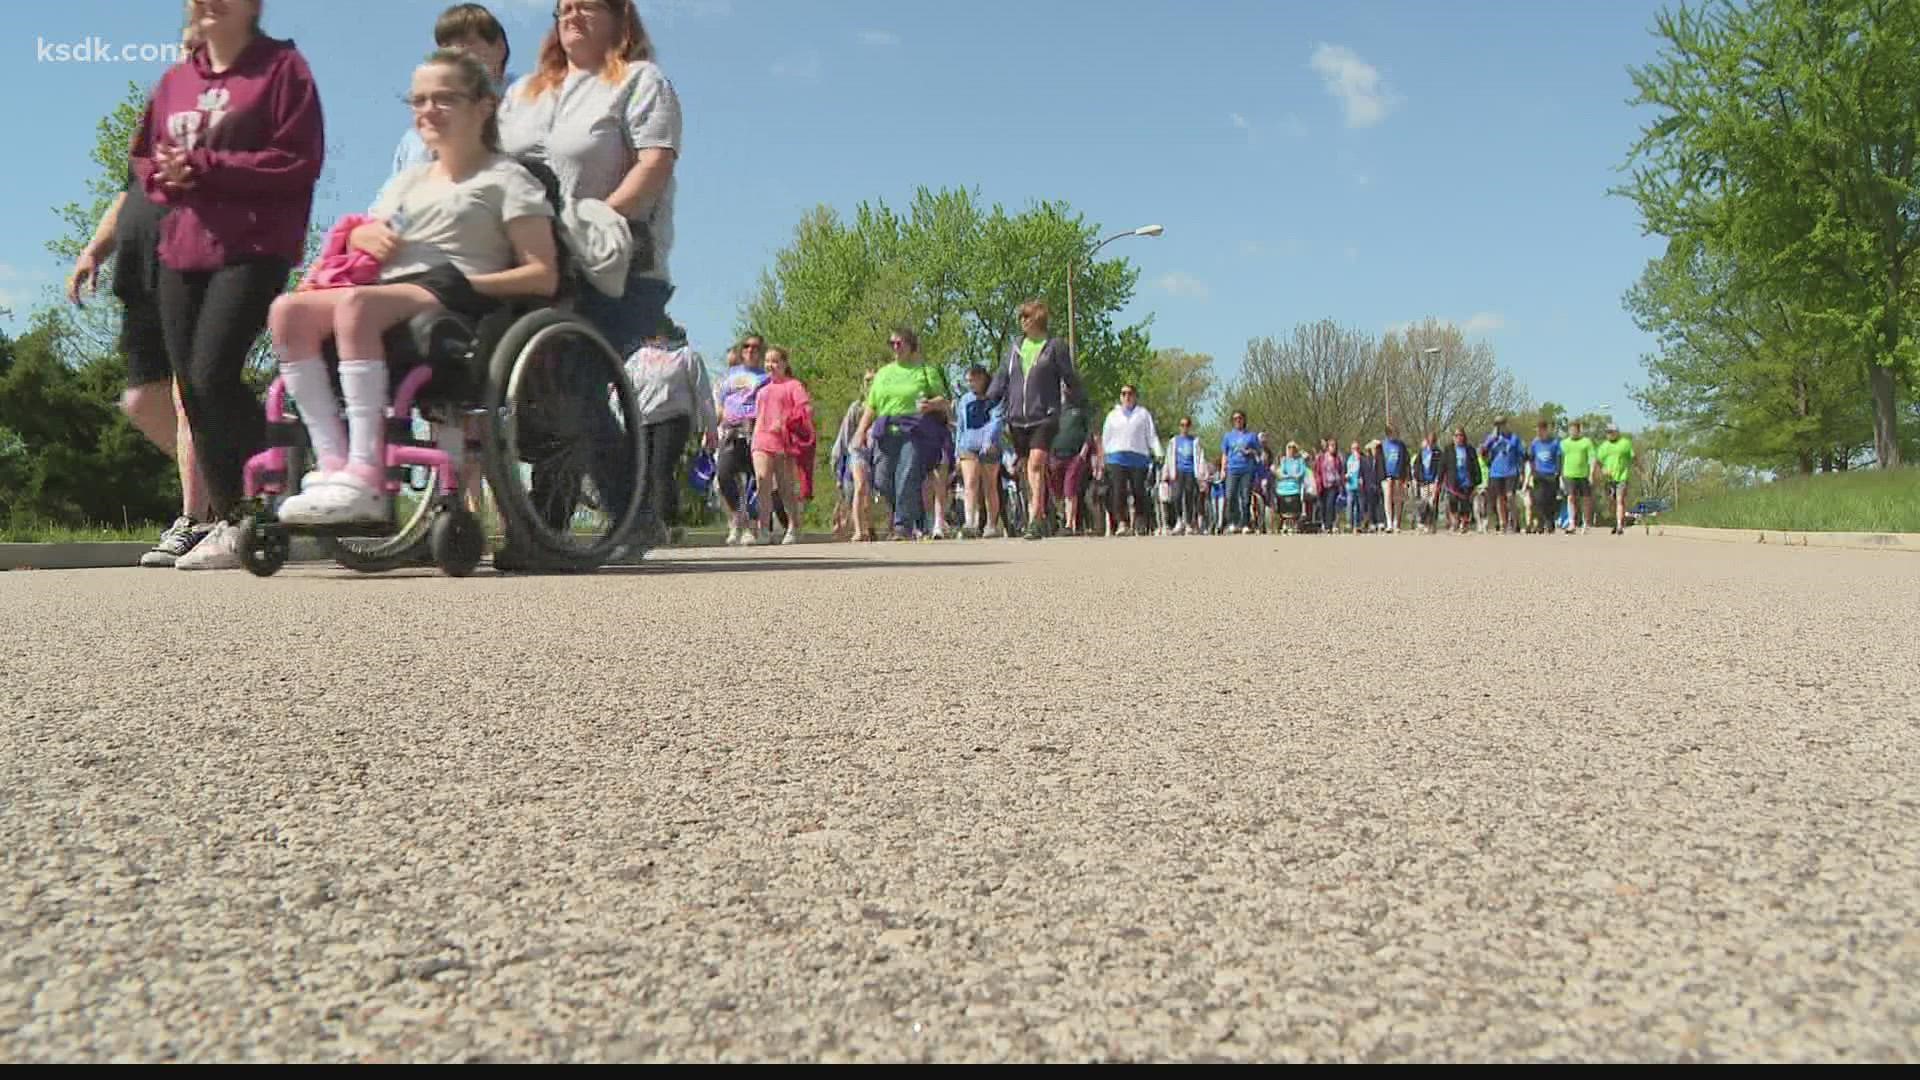 Sunday's walk brought together people with muscular dystrophy and their advocates, a chance for some to reconnect and share stories.